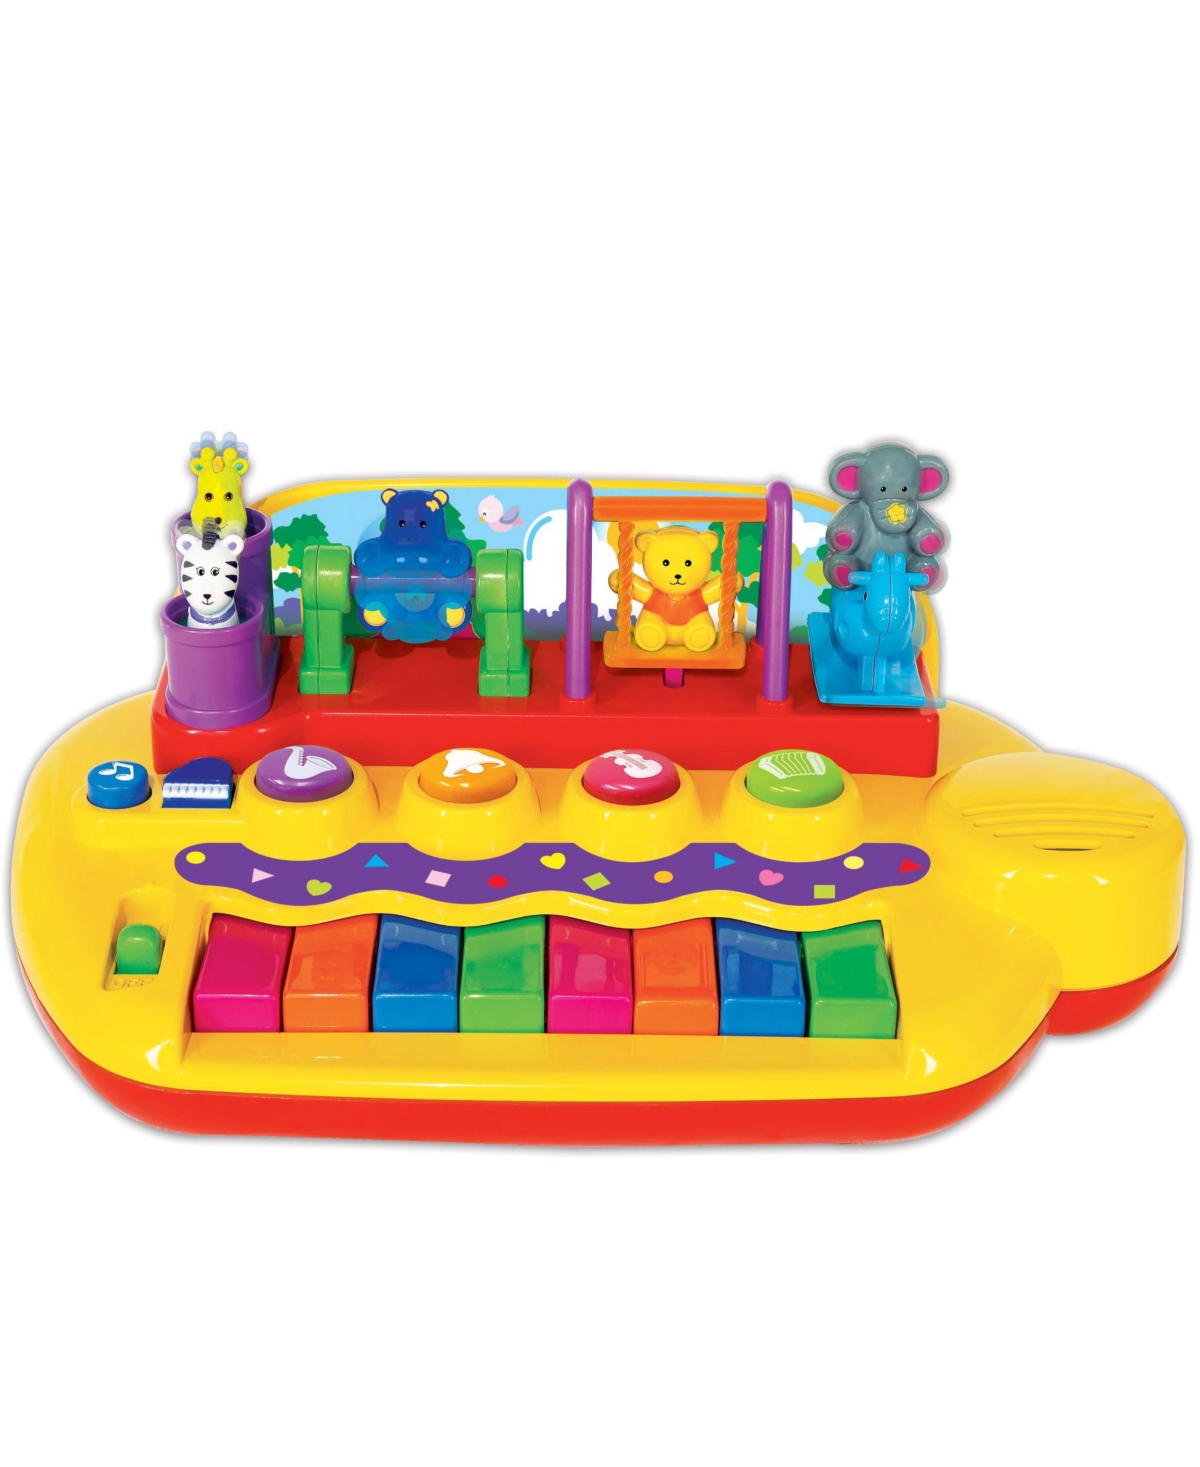 Kiddieland Playful Pals Piano In Multi